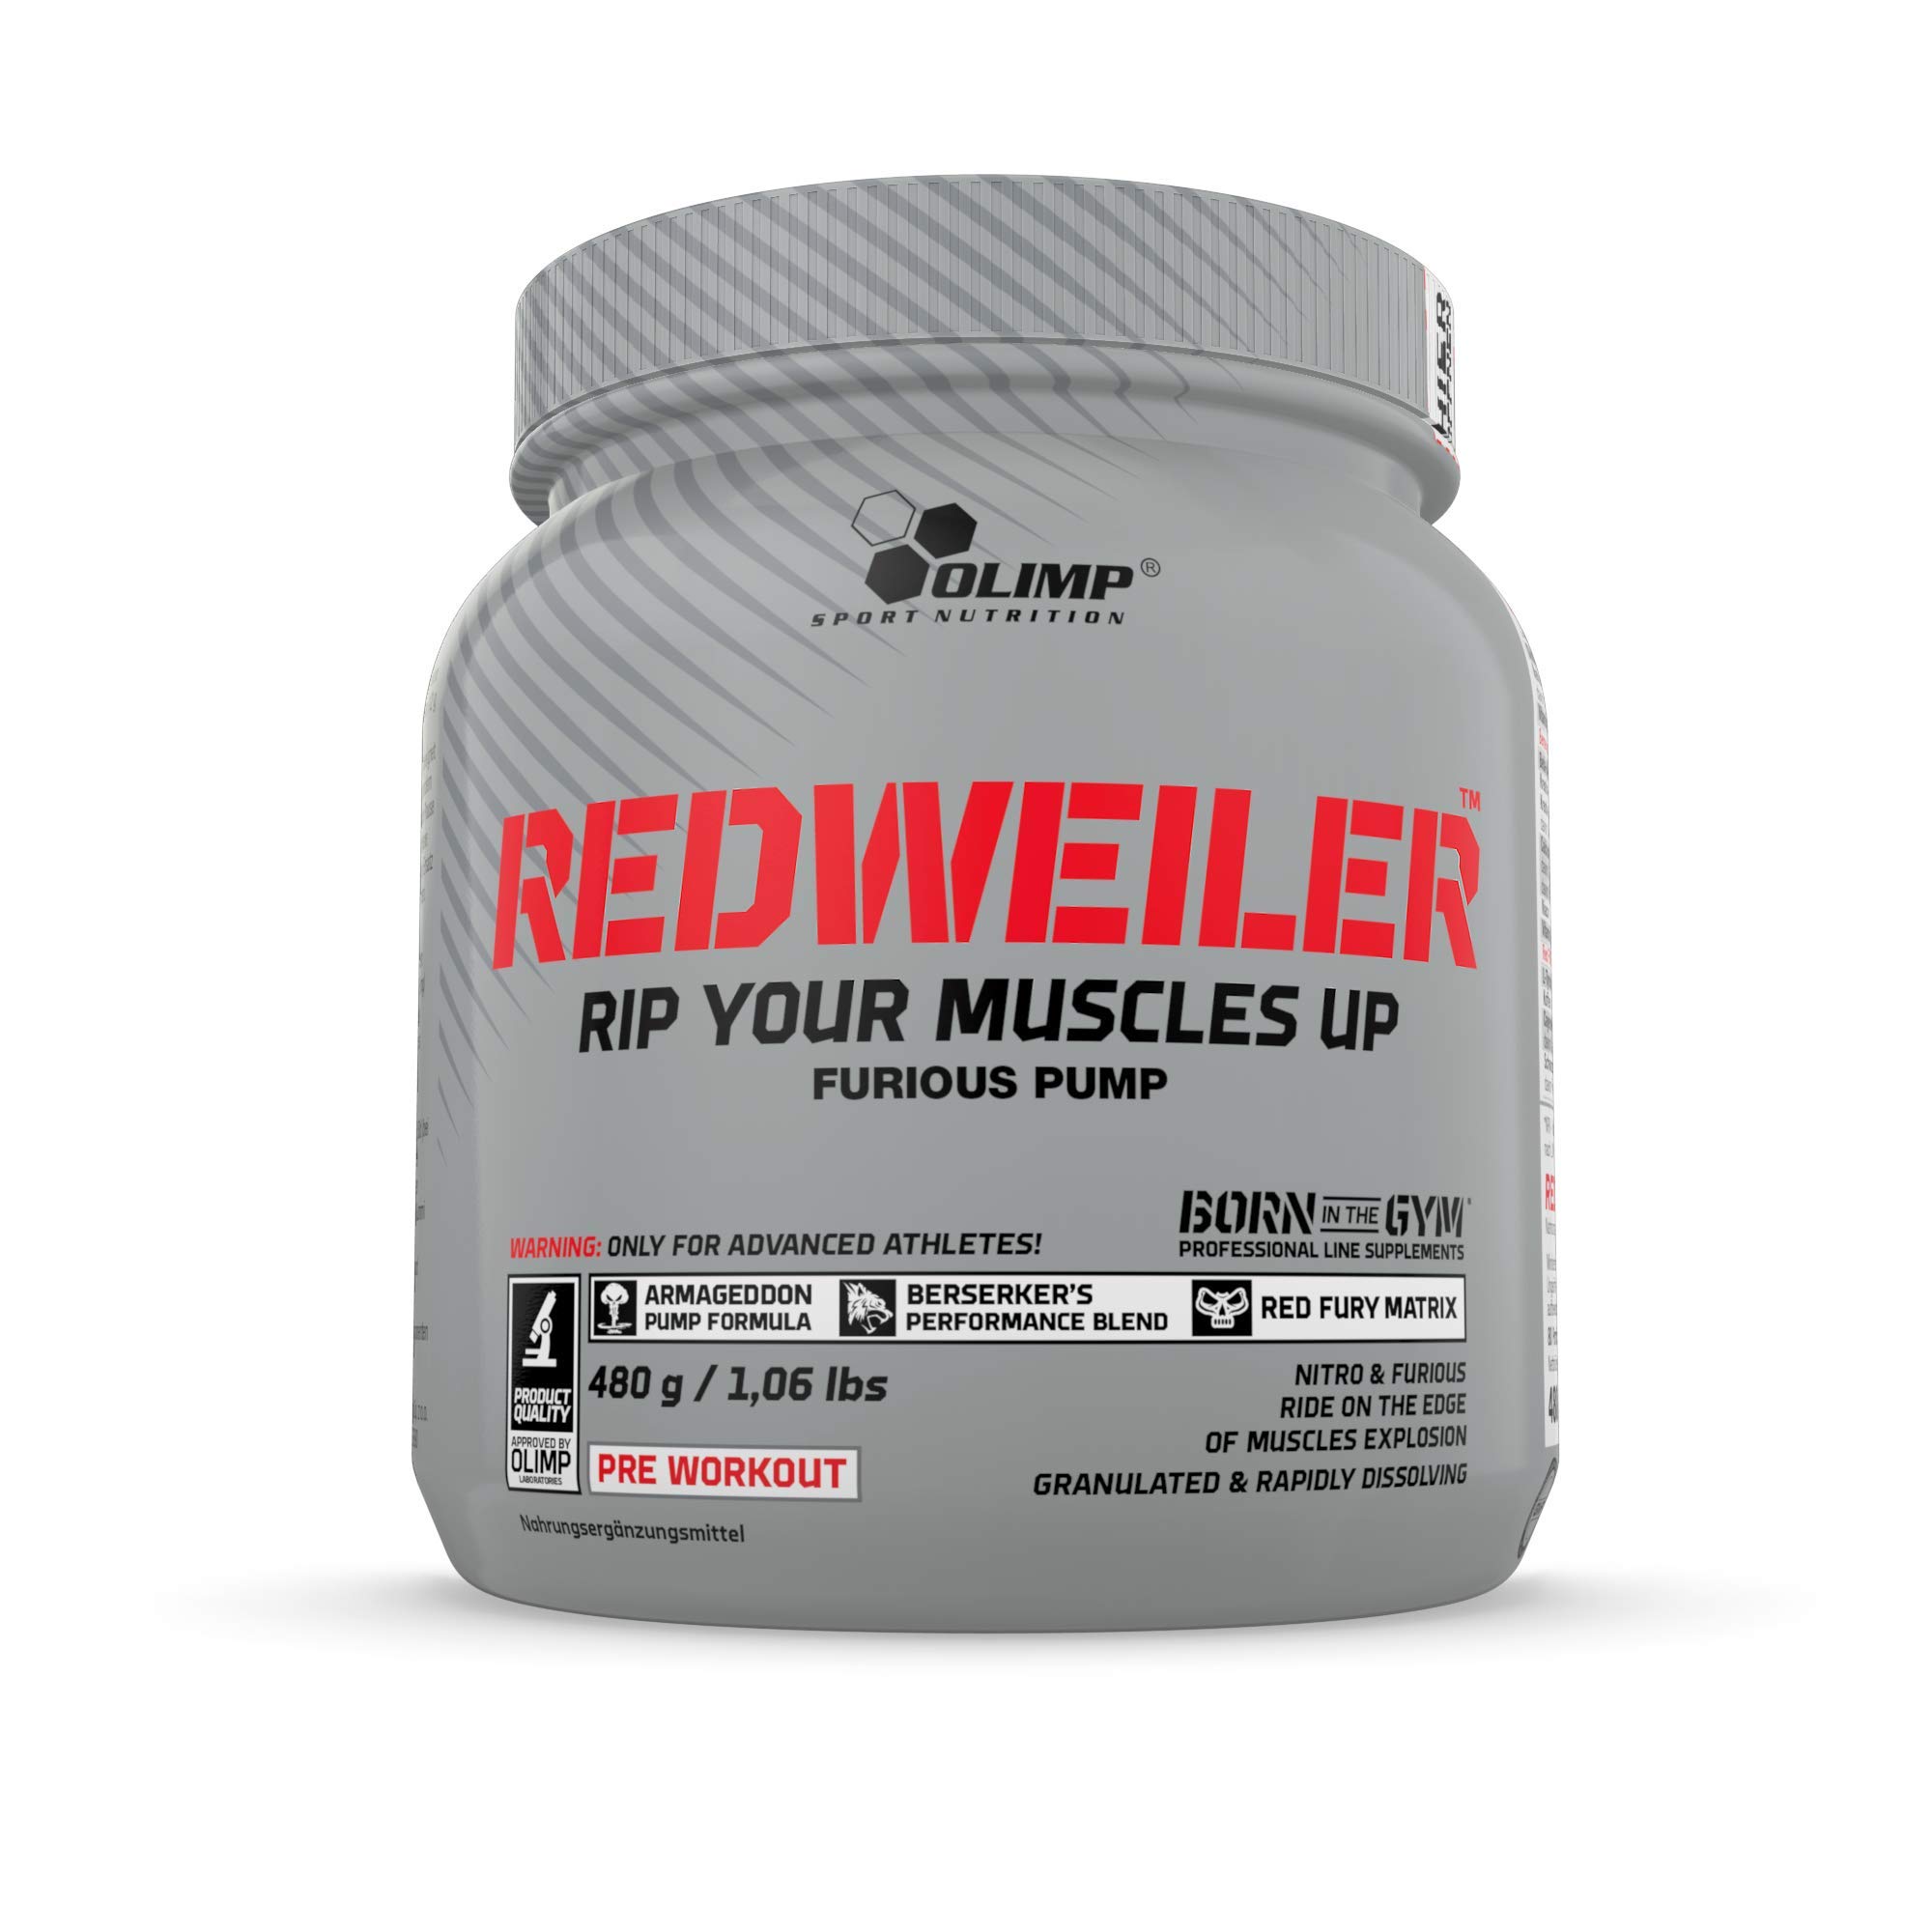 Olimp Redweiler Pre Workout Blueberry Madness, 4356, 480 g